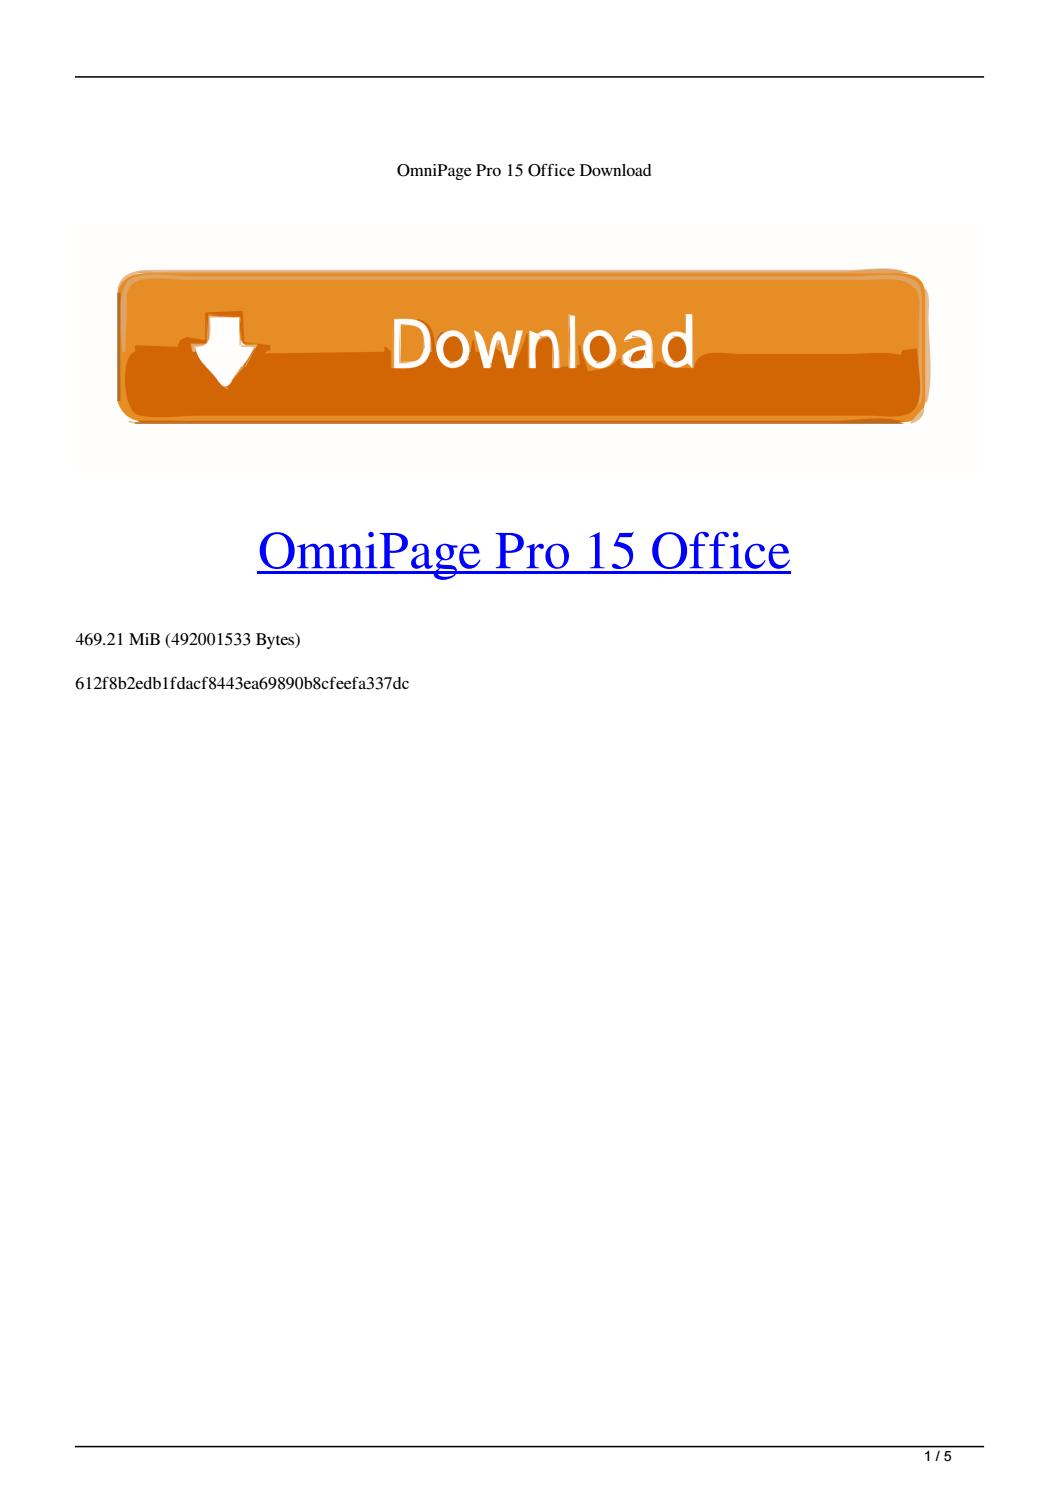 omnipage pro 17 windows 7